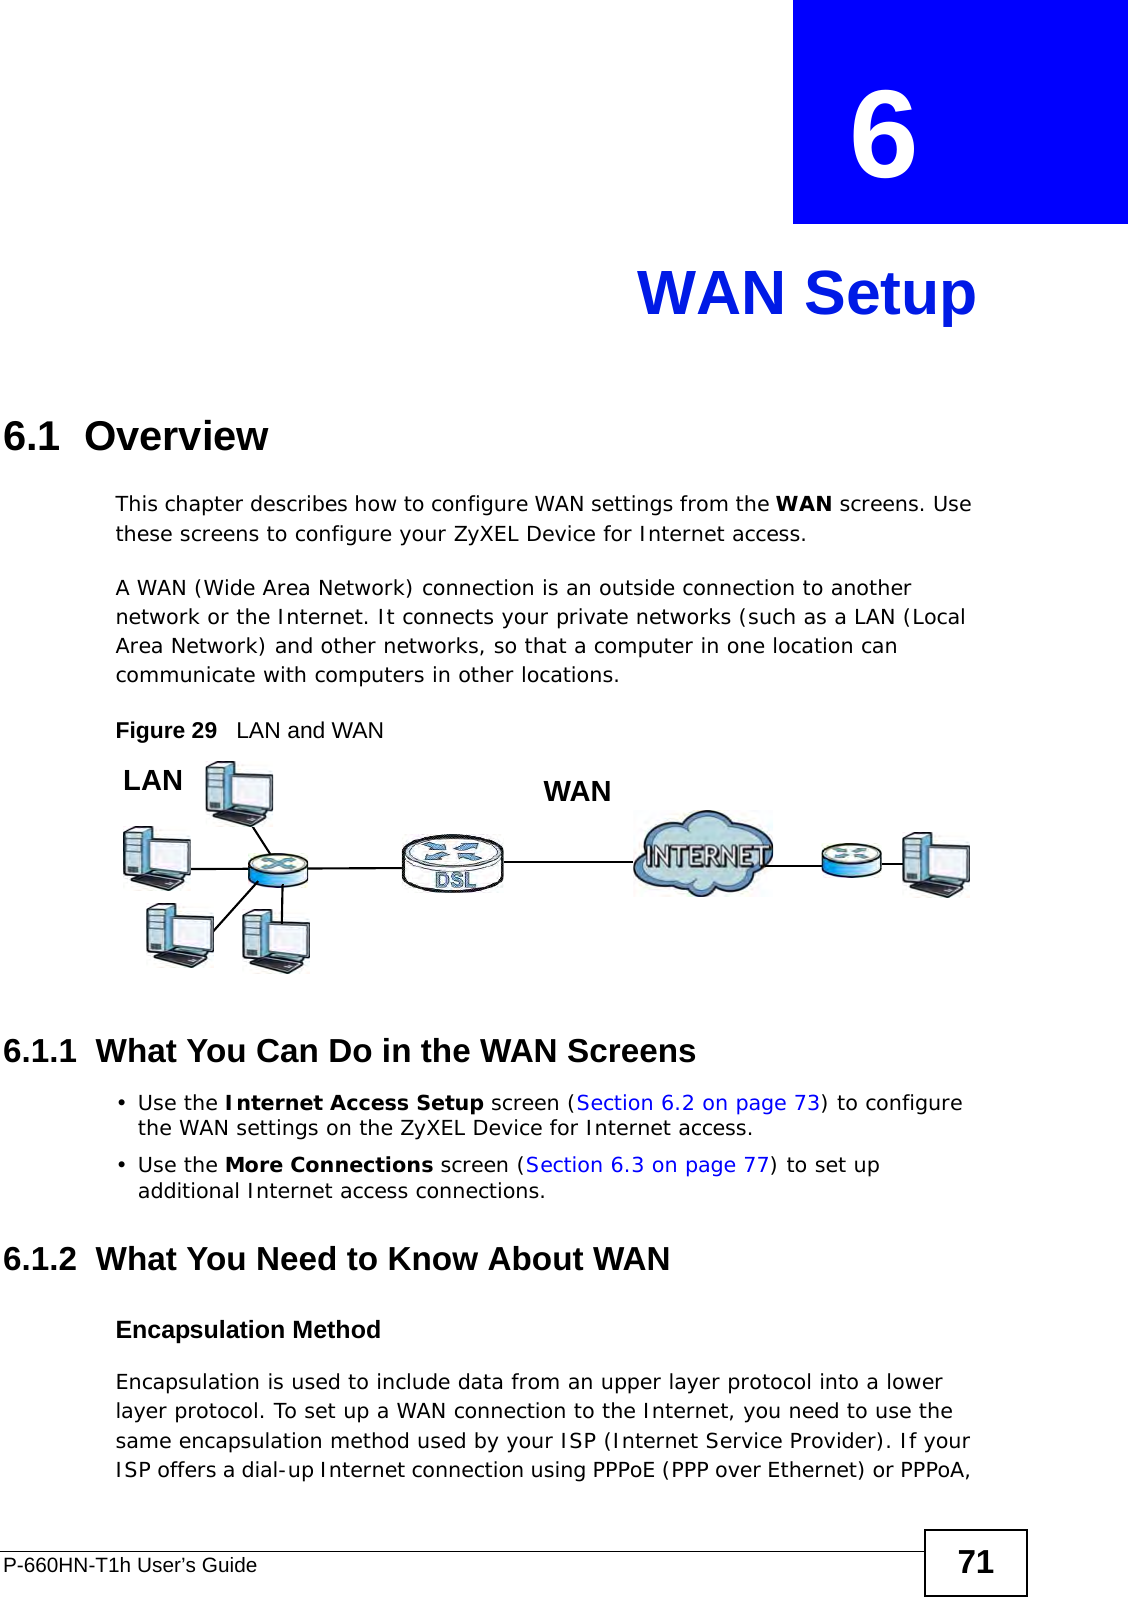 P-660HN-T1h User’s Guide 71CHAPTER  6 WAN Setup6.1  OverviewThis chapter describes how to configure WAN settings from the WAN screens. Use these screens to configure your ZyXEL Device for Internet access.A WAN (Wide Area Network) connection is an outside connection to another network or the Internet. It connects your private networks (such as a LAN (Local Area Network) and other networks, so that a computer in one location can communicate with computers in other locations.Figure 29   LAN and WAN6.1.1  What You Can Do in the WAN Screens•Use the Internet Access Setup screen (Section 6.2 on page 73) to configure the WAN settings on the ZyXEL Device for Internet access.•Use the More Connections screen (Section 6.3 on page 77) to set up additional Internet access connections.6.1.2  What You Need to Know About WANEncapsulation MethodEncapsulation is used to include data from an upper layer protocol into a lower layer protocol. To set up a WAN connection to the Internet, you need to use the same encapsulation method used by your ISP (Internet Service Provider). If your ISP offers a dial-up Internet connection using PPPoE (PPP over Ethernet) or PPPoA, WANLAN